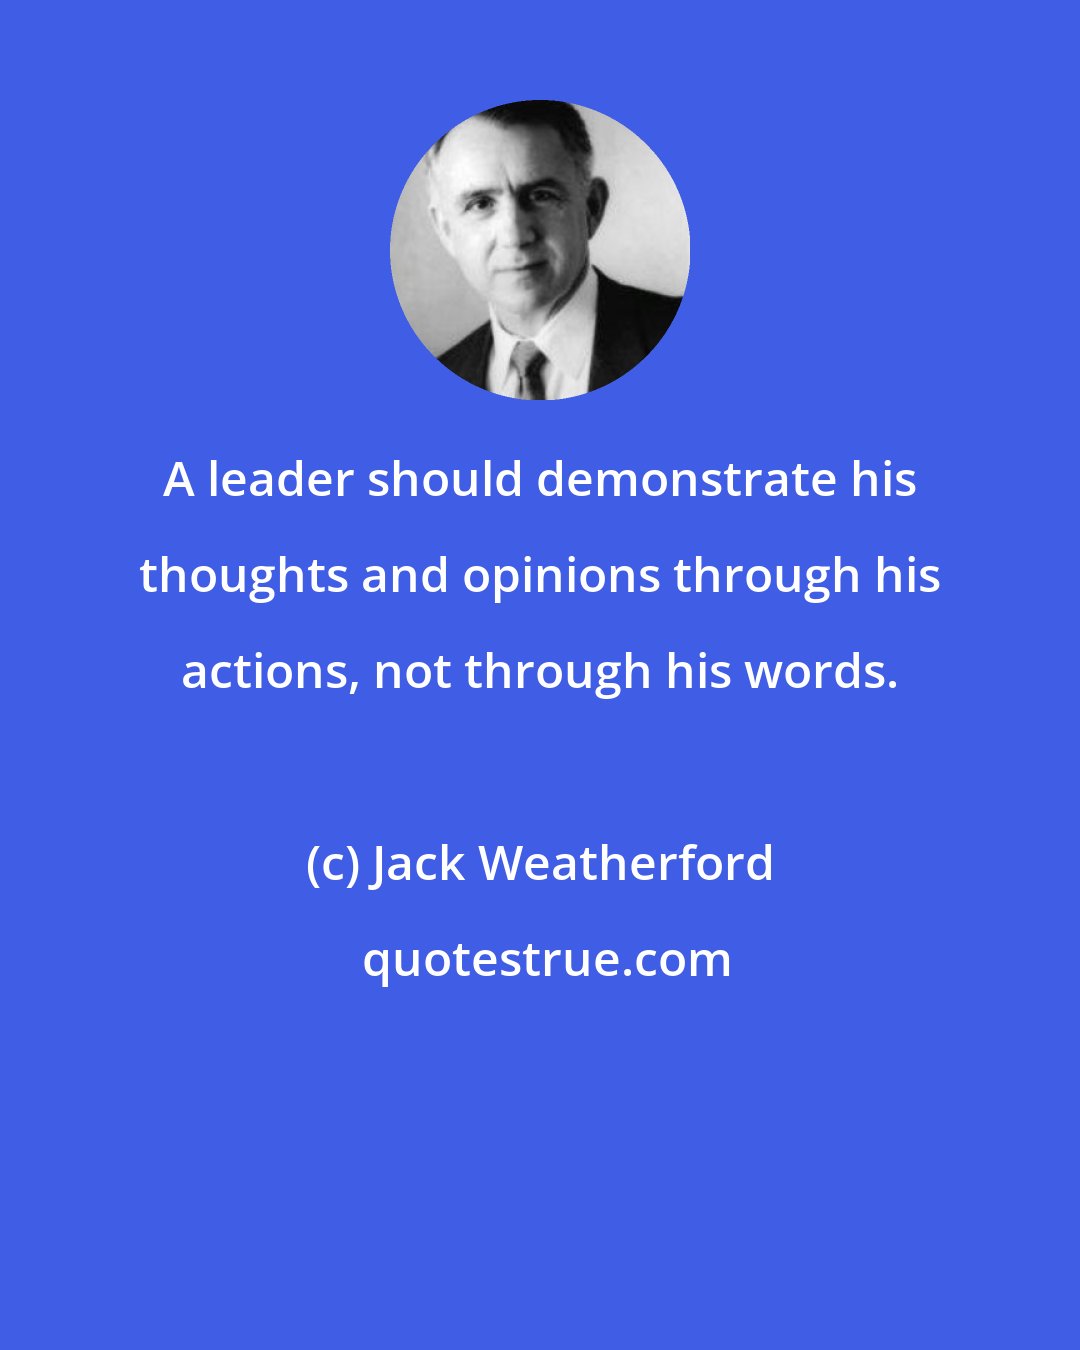 Jack Weatherford: A leader should demonstrate his thoughts and opinions through his actions, not through his words.